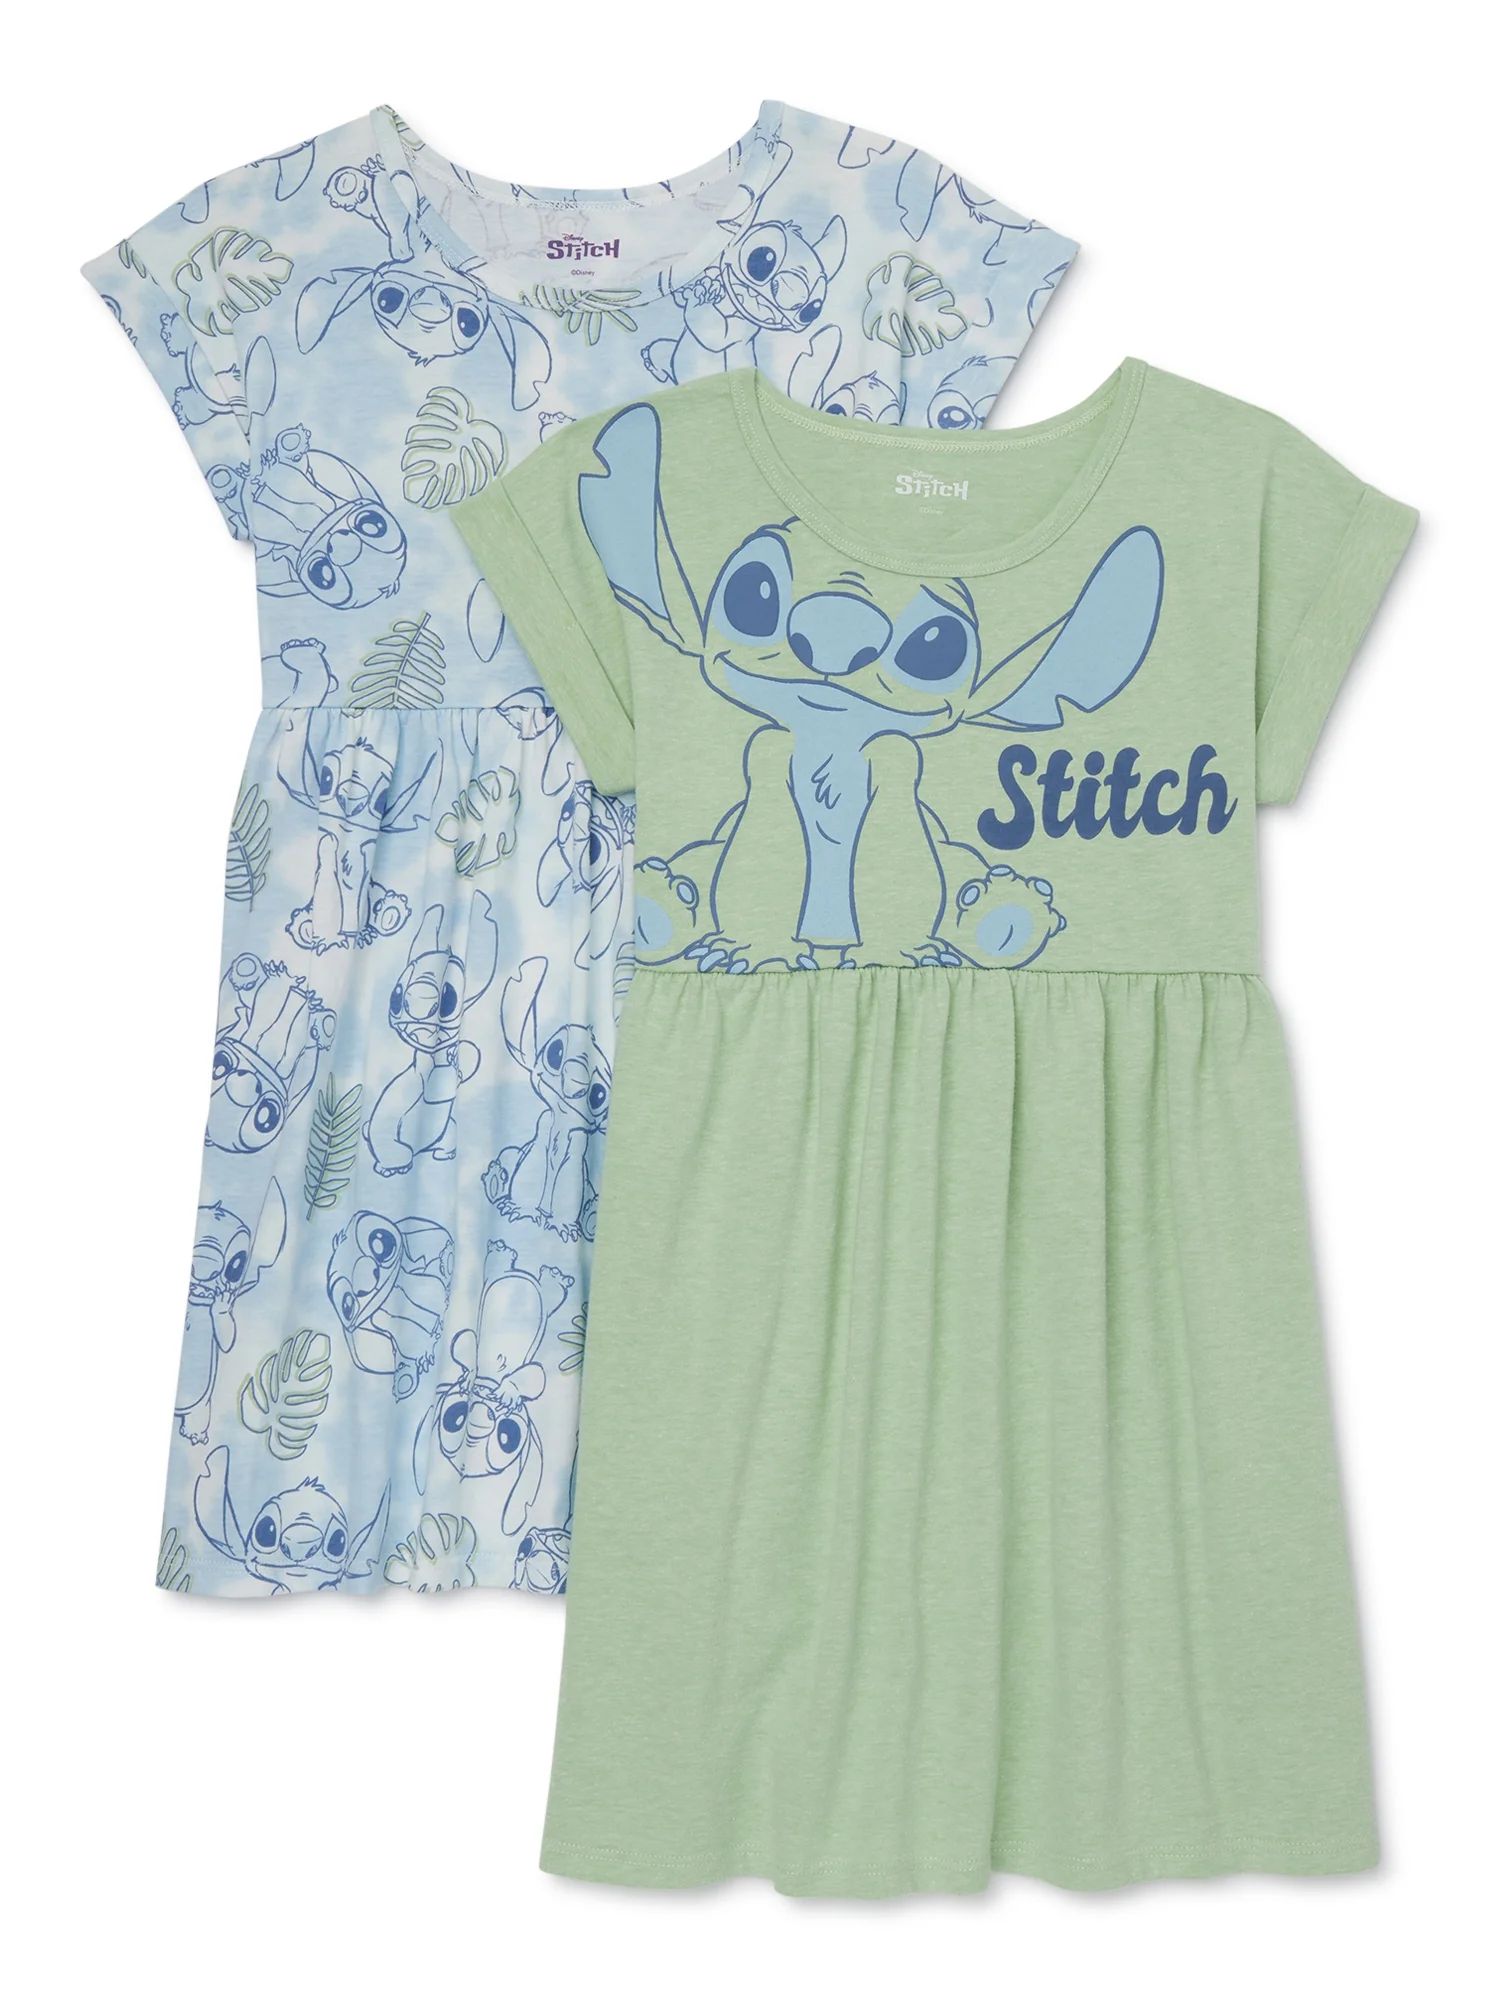 Disney’s Stitch Girls’ Play Dress with Short Sleeves, 2-Pack, Sizes 4-16 | Walmart (US)